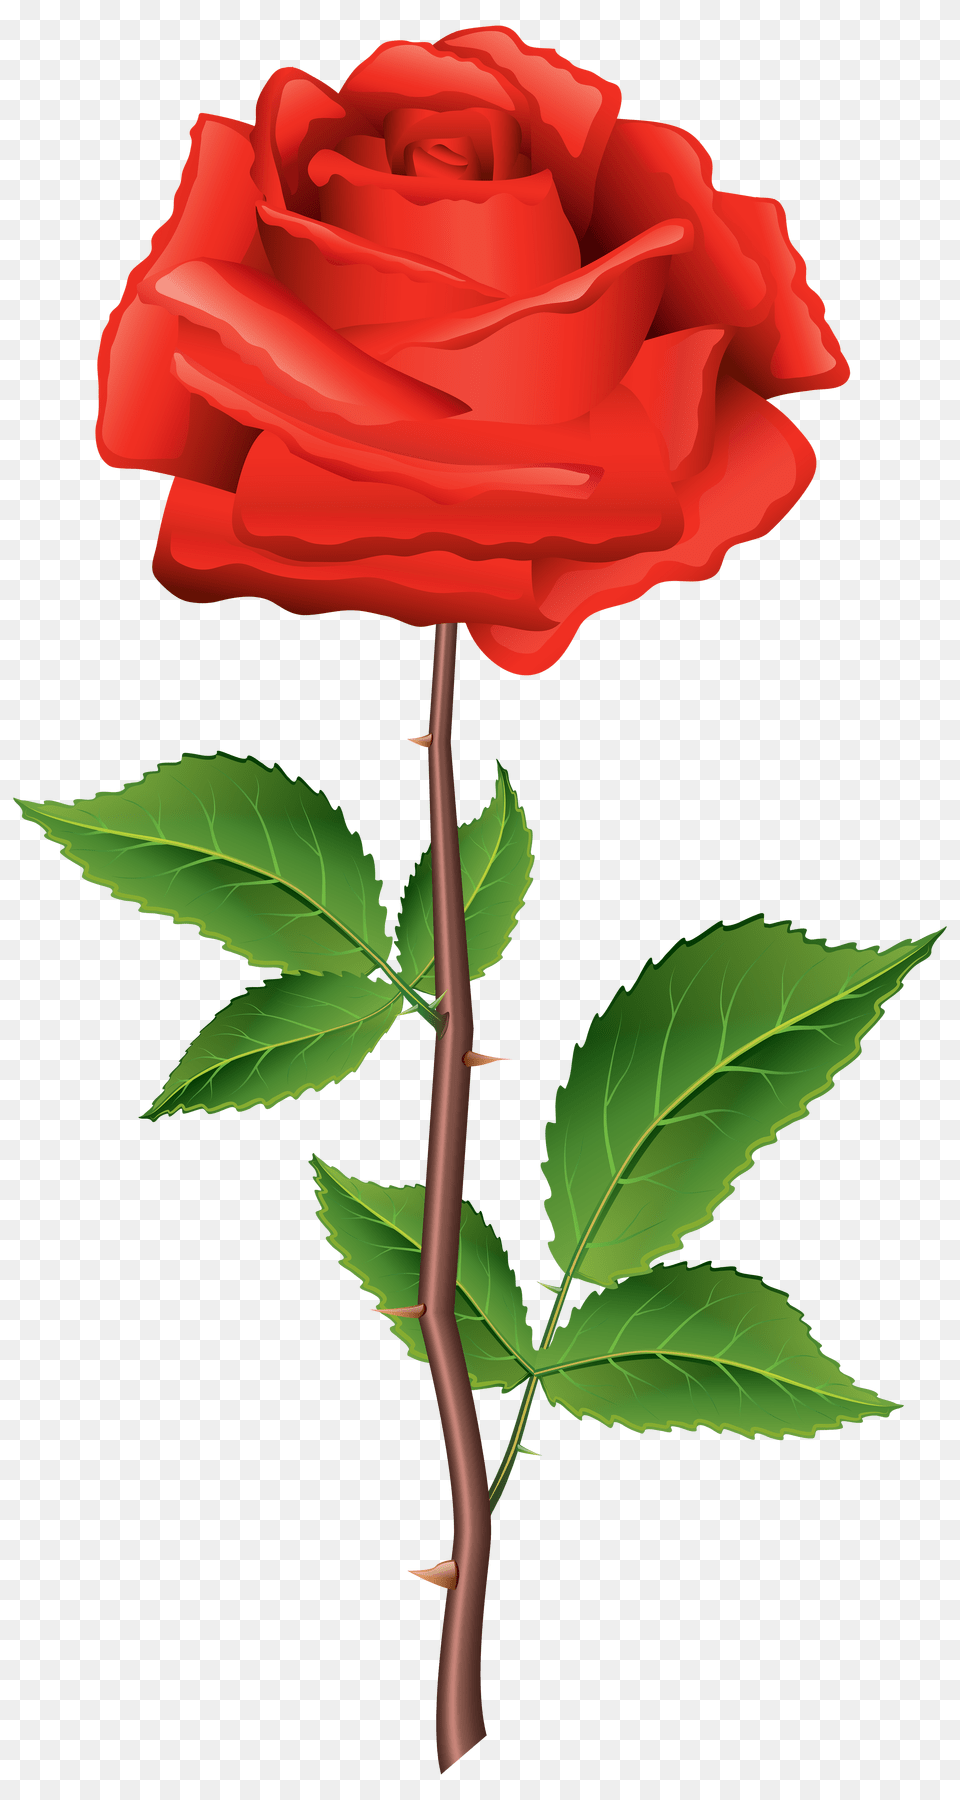 Rose, Flower, Plant, Dynamite, Weapon Png Image